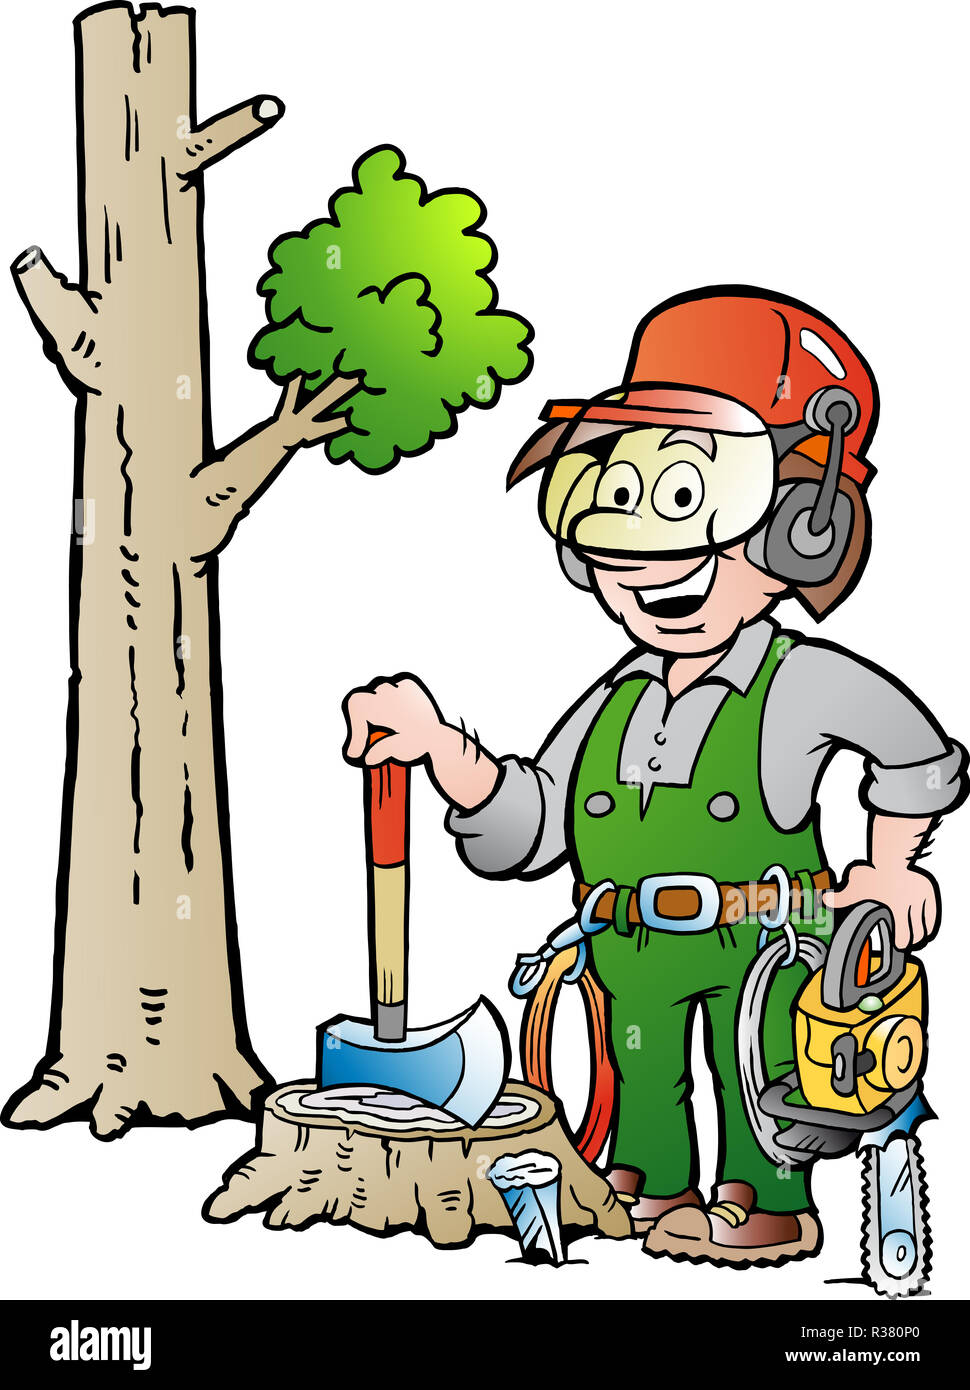 Vector Cartoon illustration of a Happy Working Lumberjack or Woodcutter Stock Photo